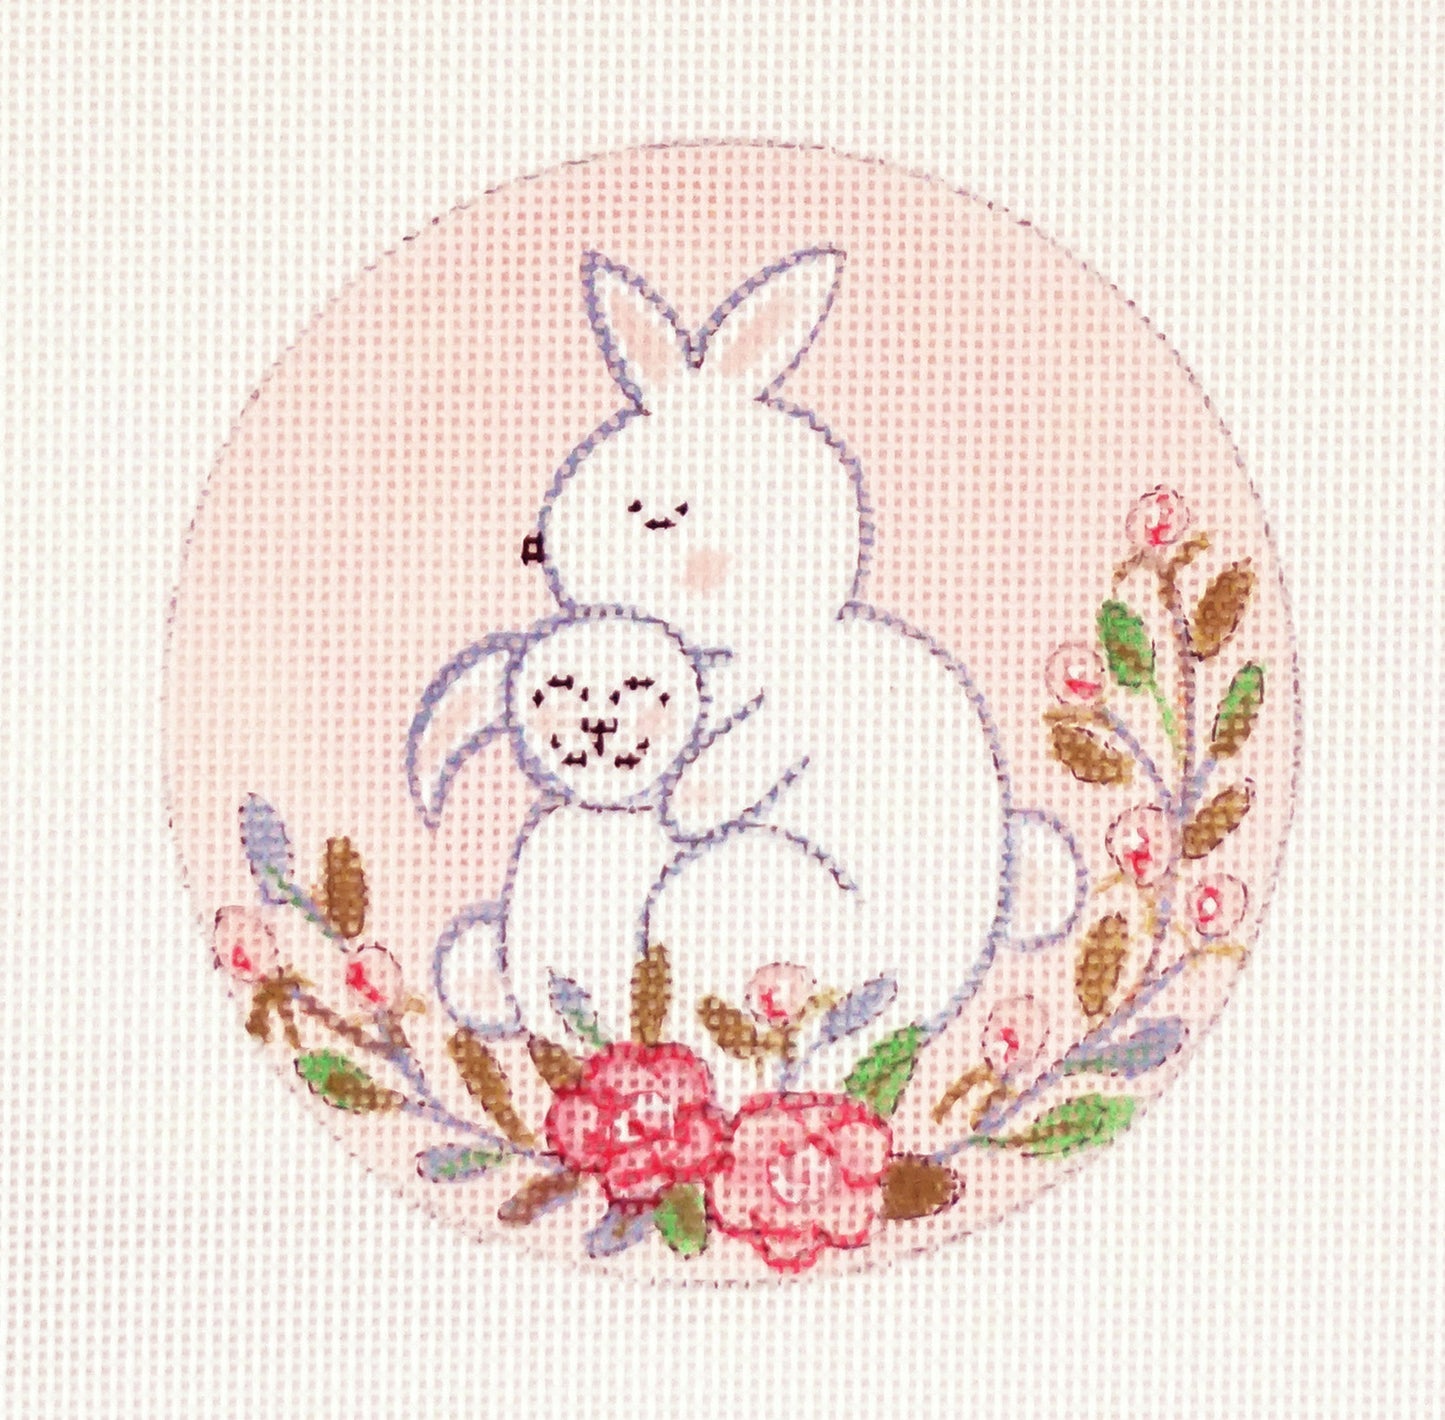 Mom & Baby Bunny LOVE handpainted 18 Mesh Needlepoint Canvas by Alice Peterson